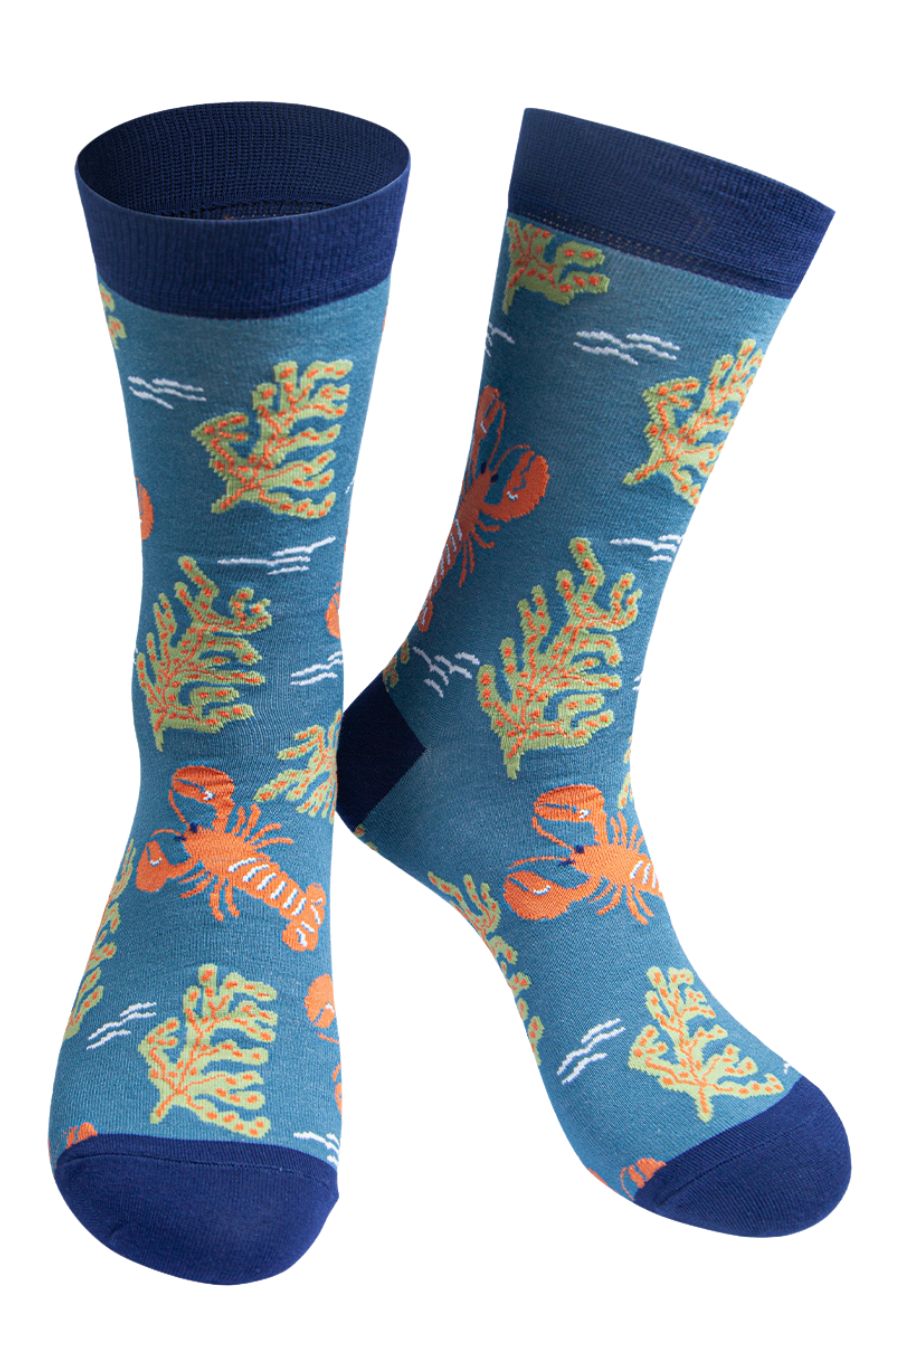 blue bamboo socks designed to look like an under water scene with lobsters and seaweed